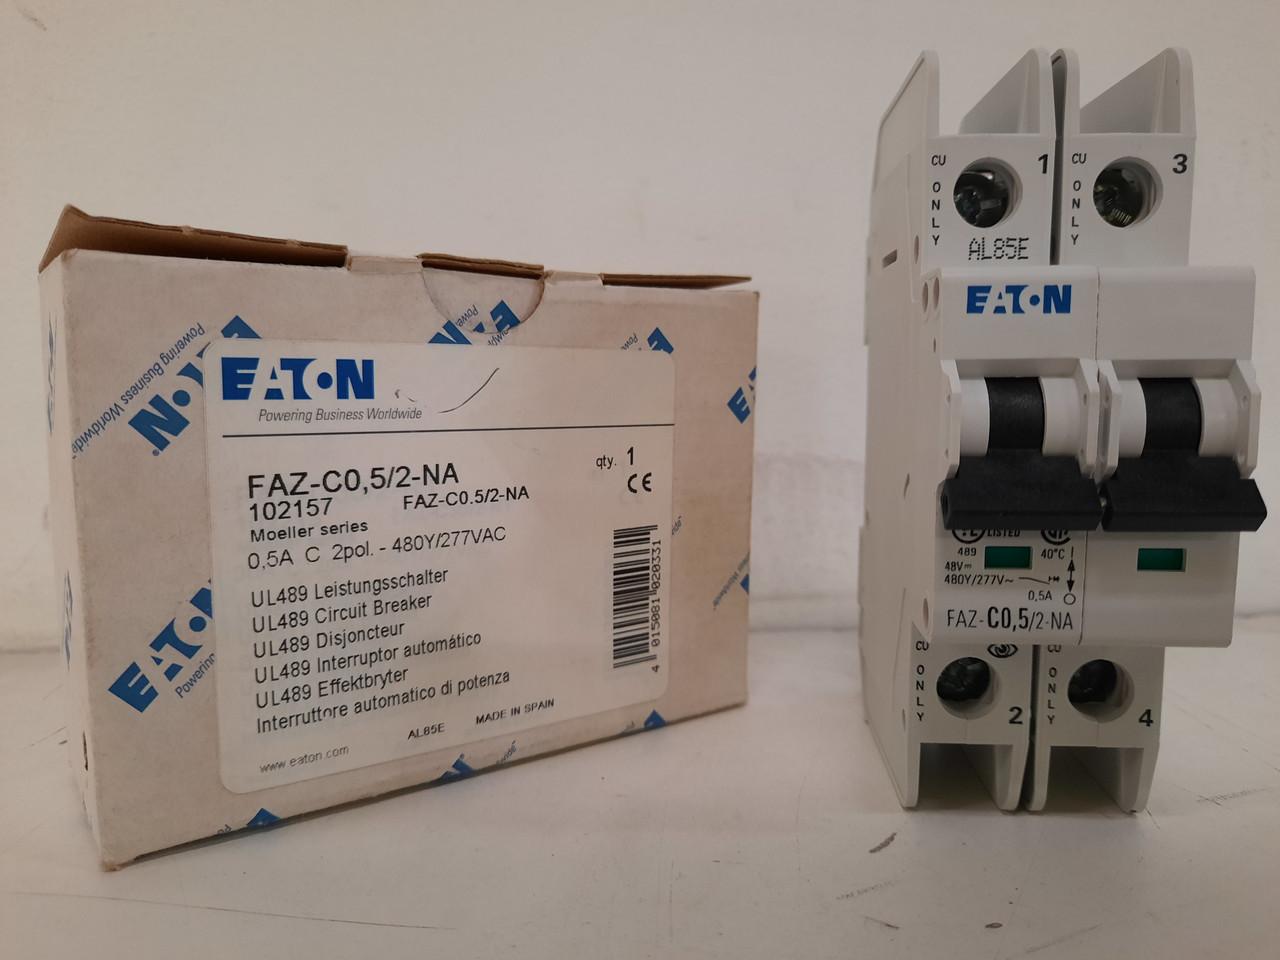 Eaton FAZ-C0.5/2-NA 277/480 VAC 50/60 Hz, 0.5 A, 2-Pole, 10/14 kA, 5 to 10 x Rated Current, Screw Terminal, DIN Rail Mount, Standard Packaging, C-Curve, Current Limiting, Thermal Magnetic